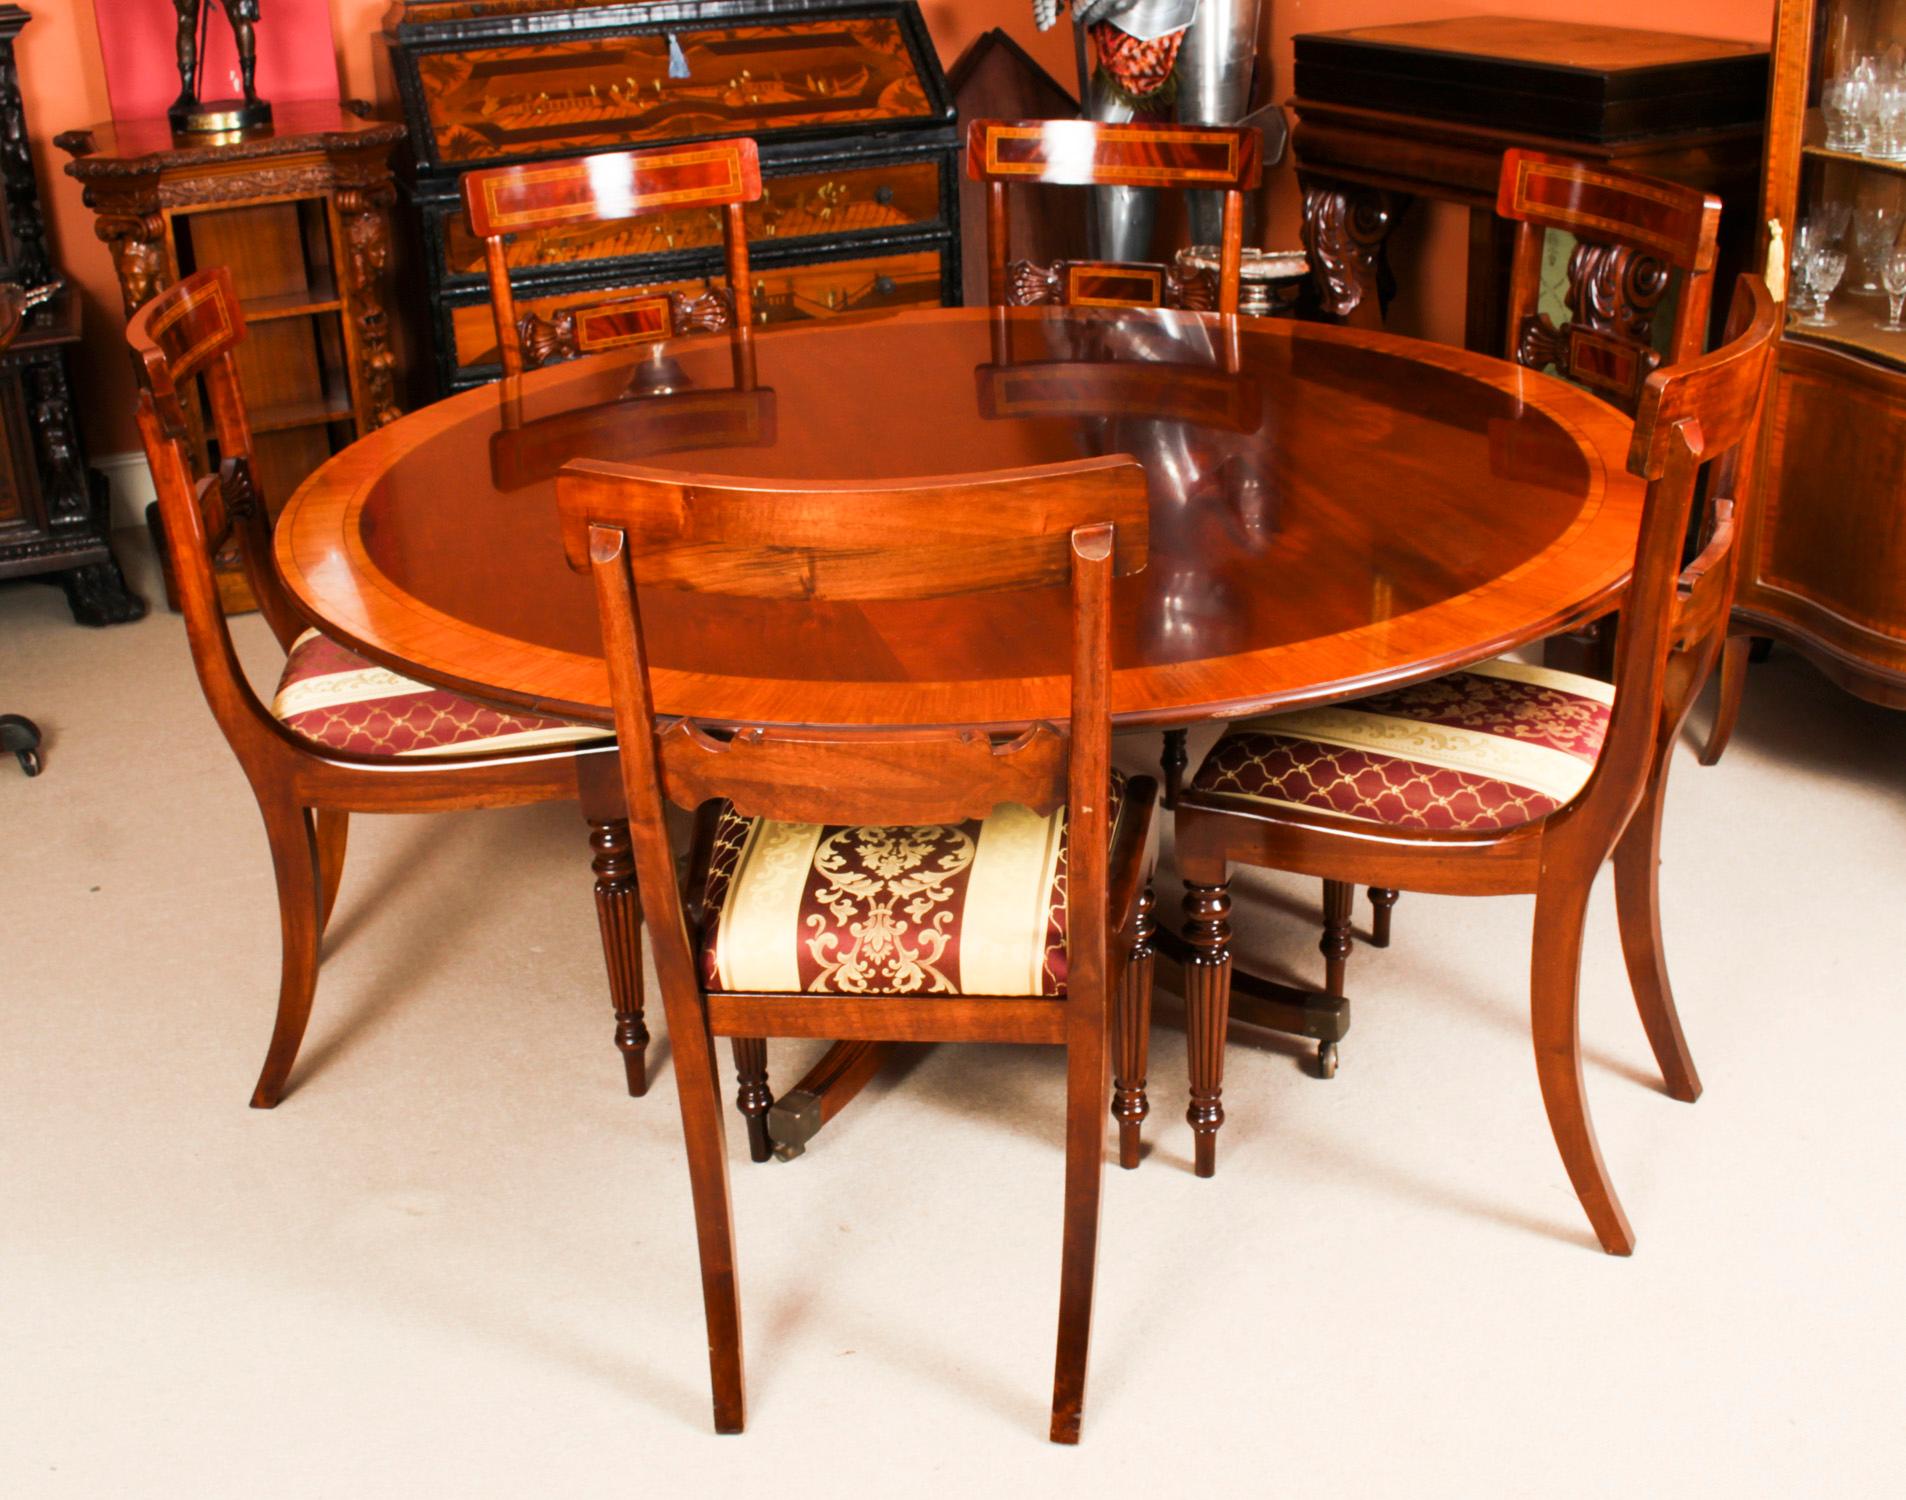 This is a beautiful Regency Revival diniung suite comprising a flame mahogany circular dining table dating from Circa 1980 and a set of six flame mahogany dining chairs.

The fabulous 5ft 3 inch diameter flame mahogany table was made by the Master